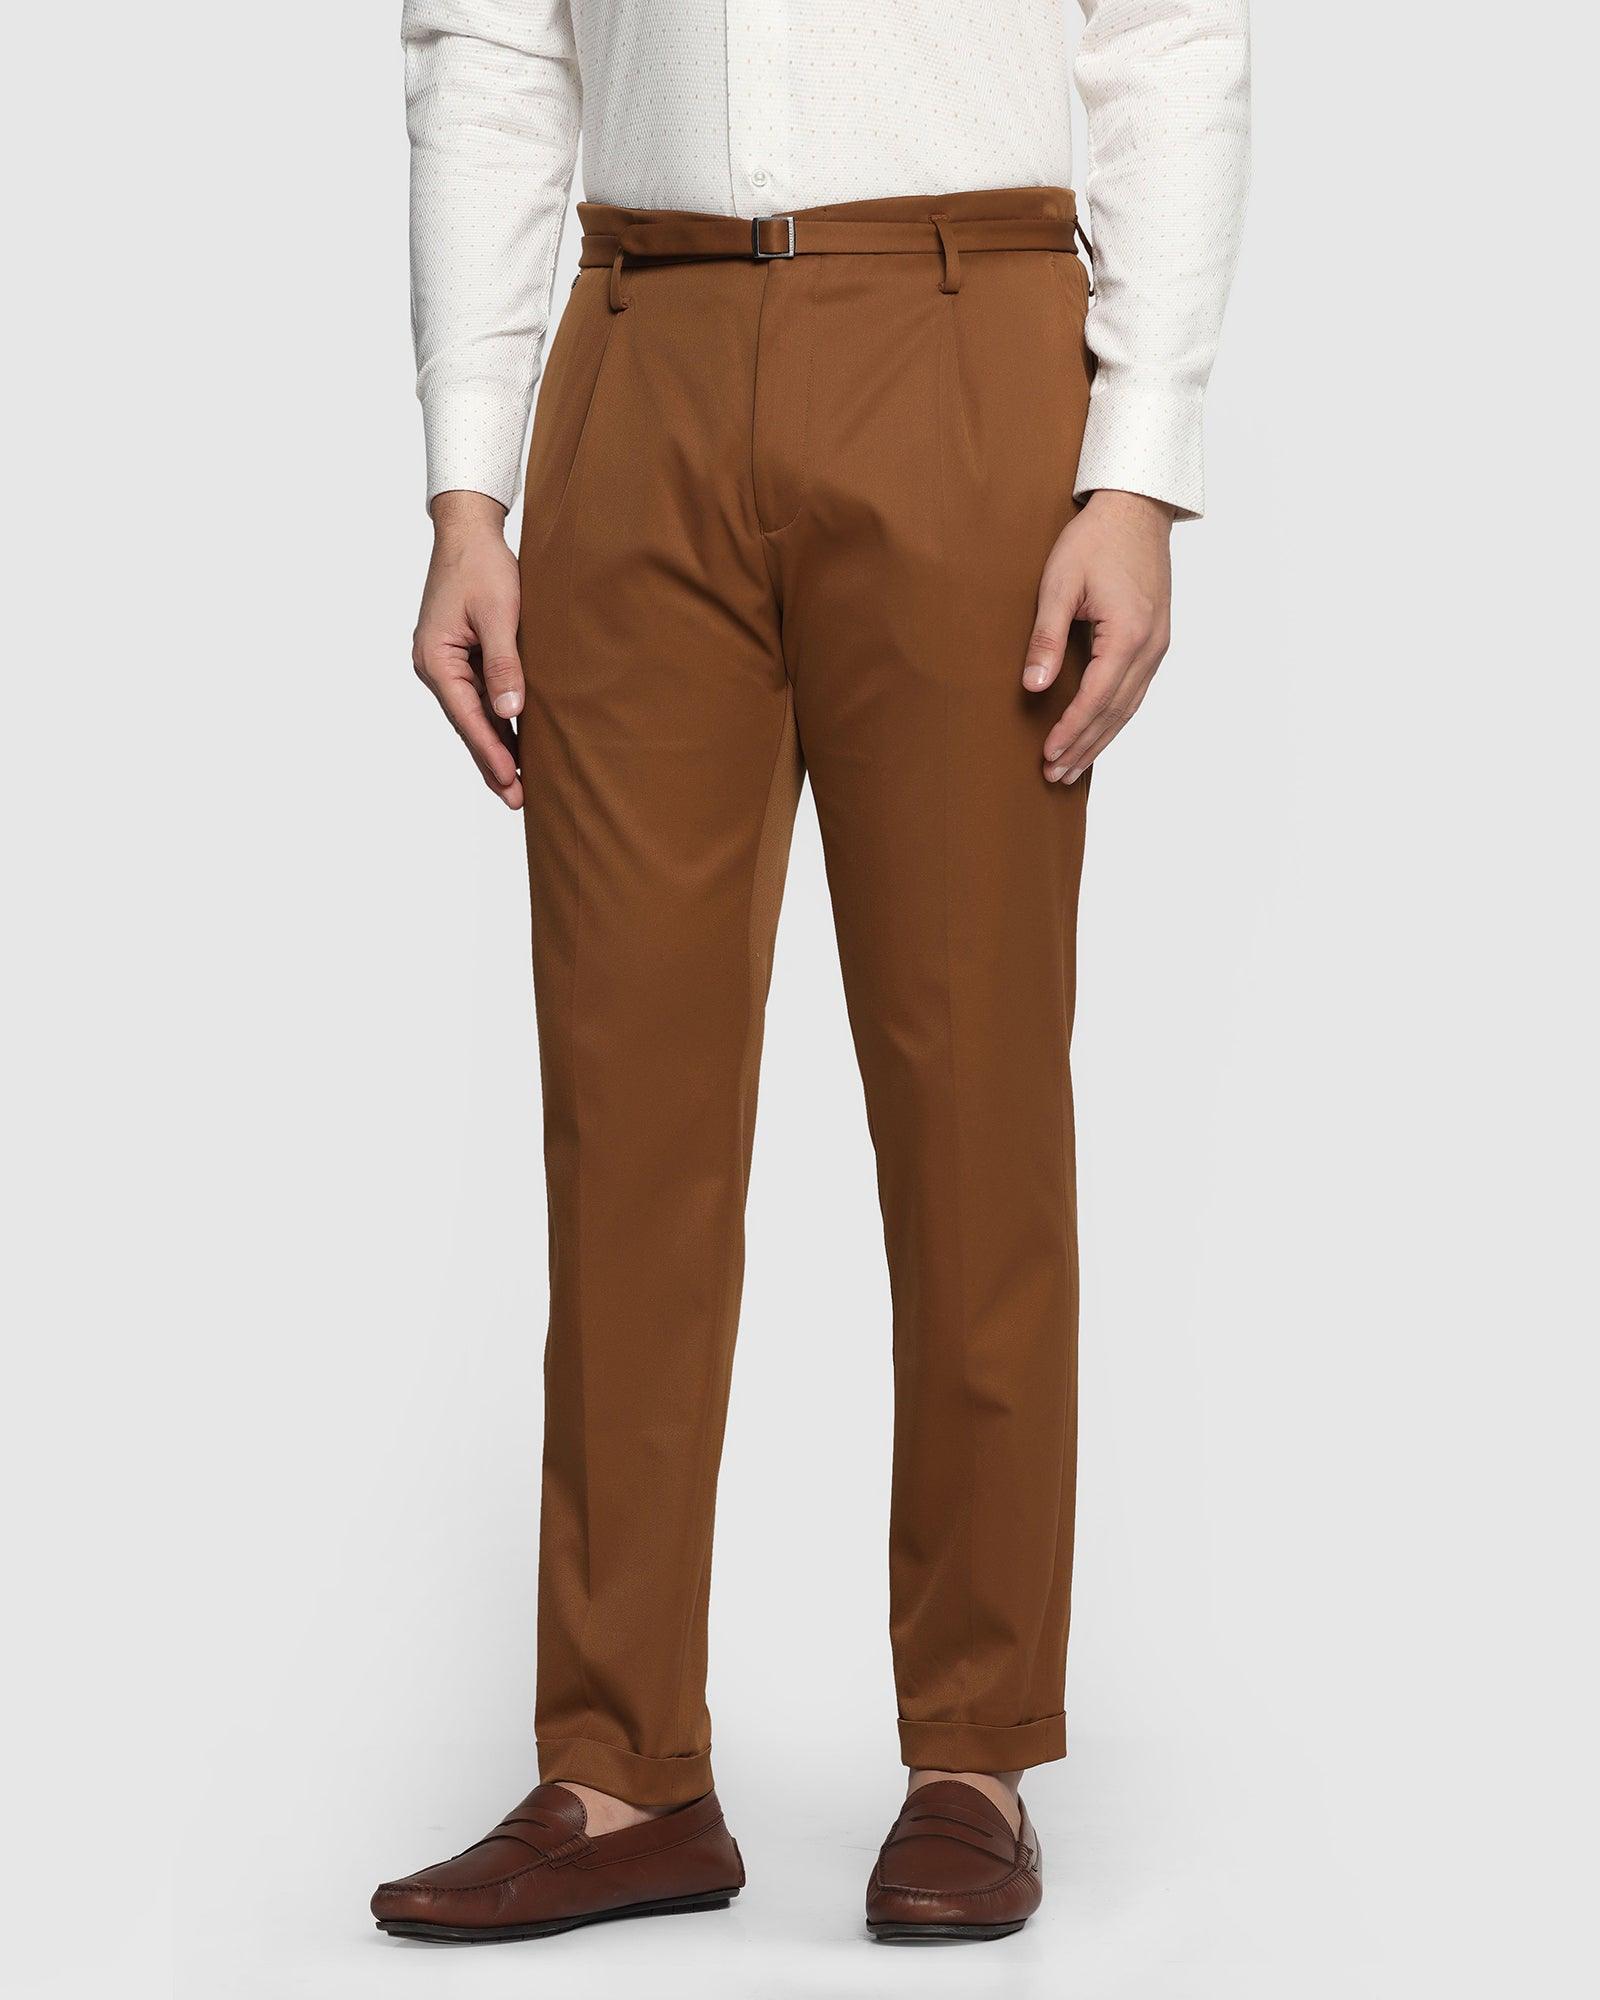 formal trousers in tobacco brown nxt fit (silas)